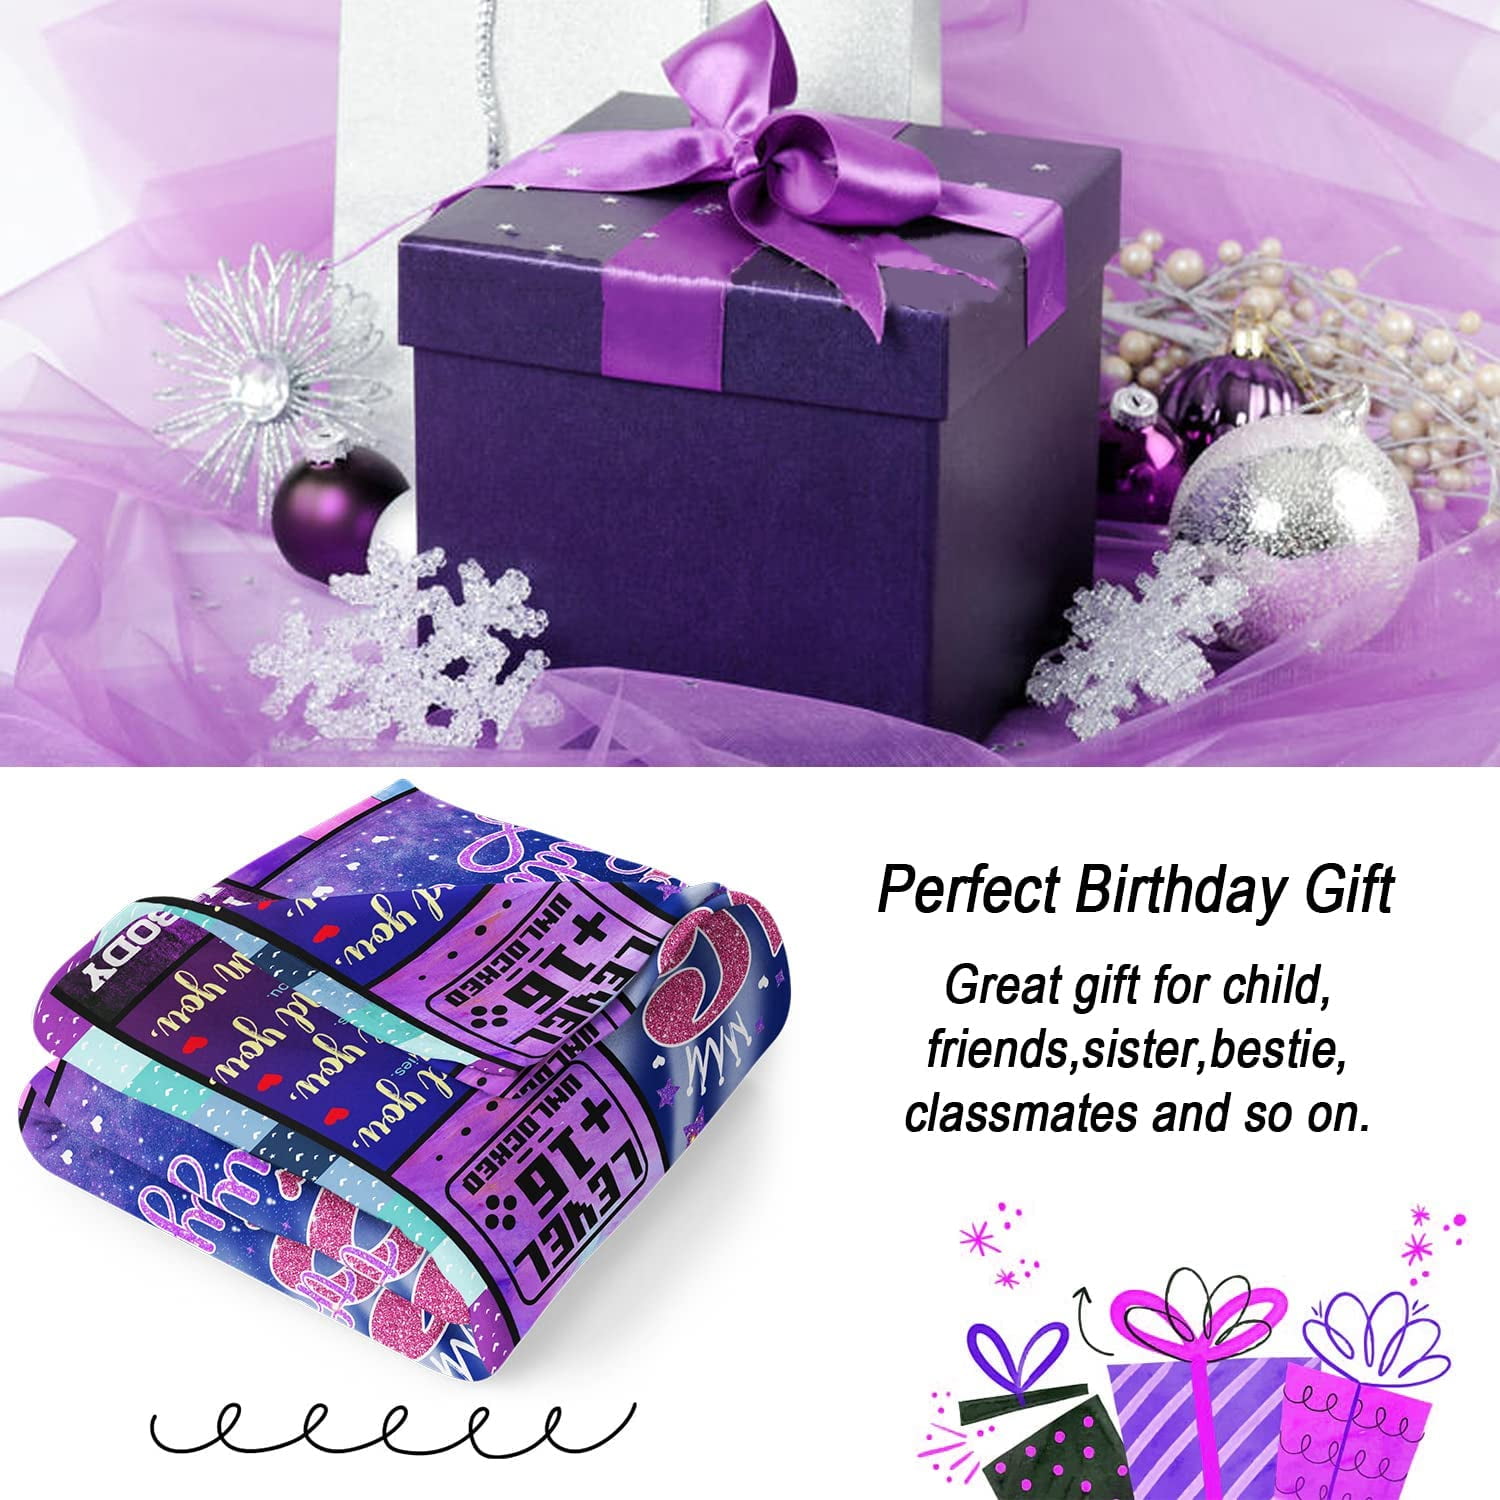 Paihvcn 11 Year Old Girl Birthday Gift Ideas, 11th Birthday Decorations for  Girls, Birthday Gifts for Girls Age 11, 11 Yr Old Girl Gifts, Eleven Year